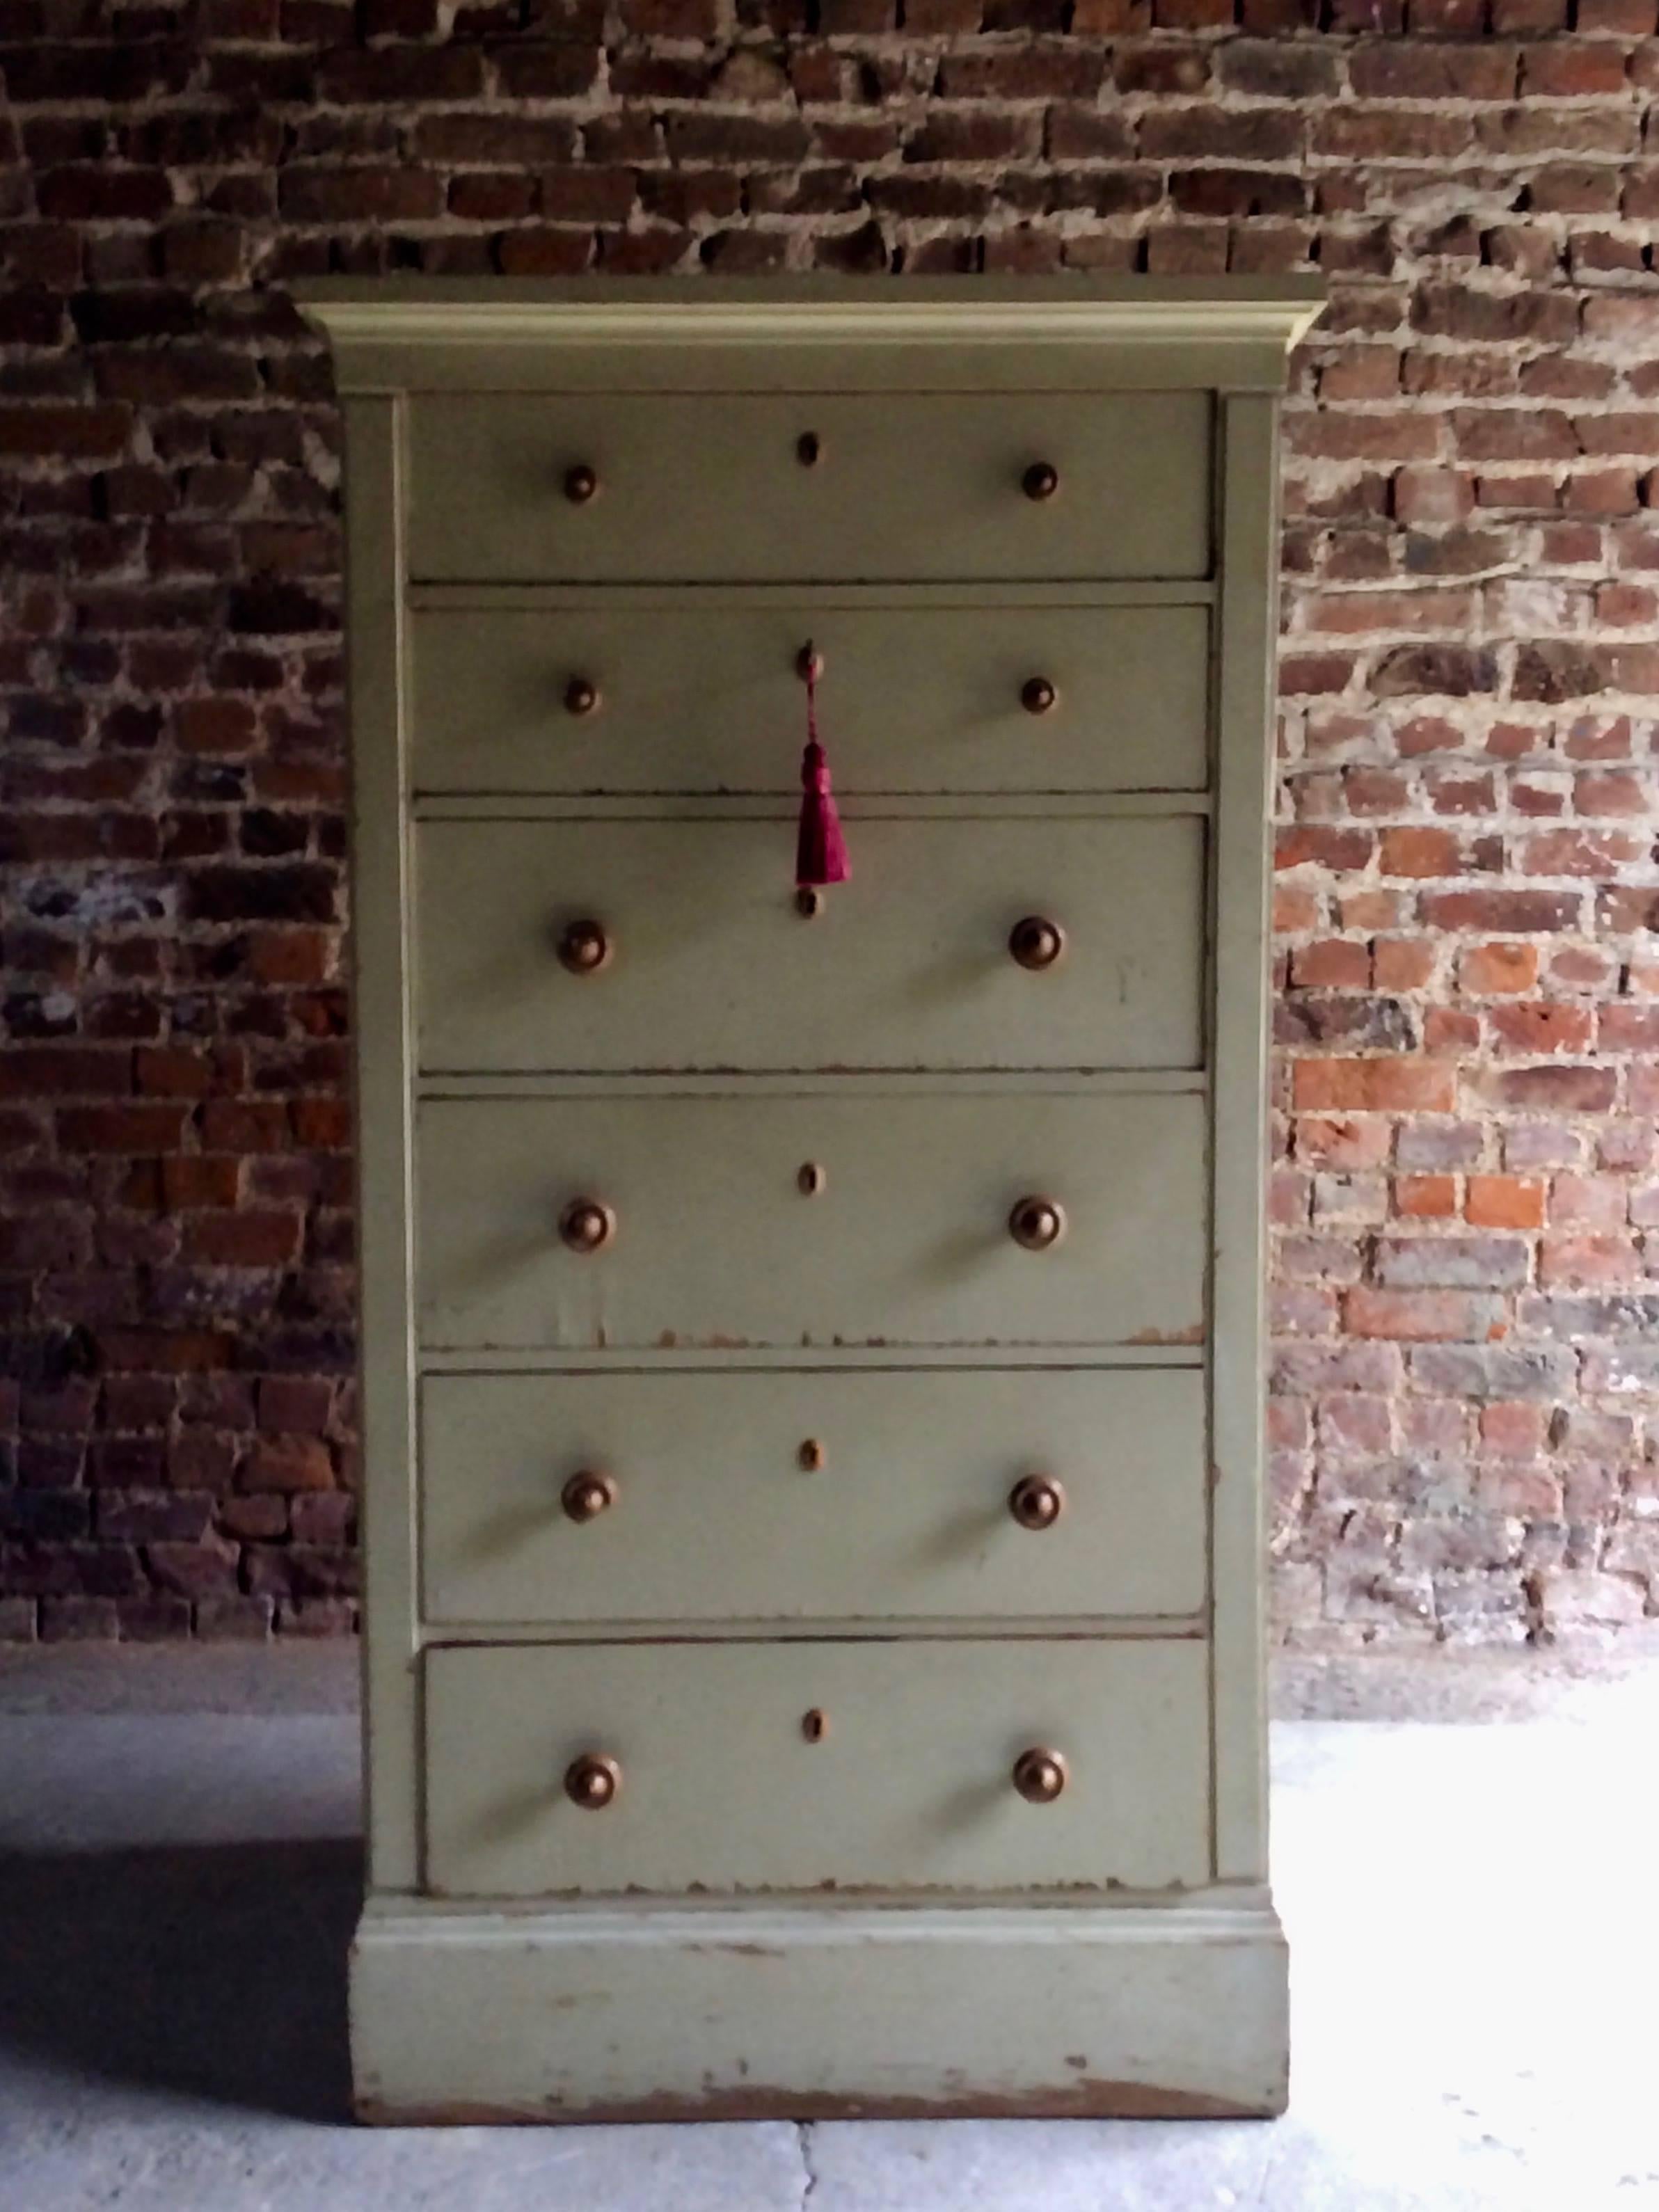 Mahogany Gustavian Style Tallboy Chest of Drawers Antique 19th Century Painted Distressed